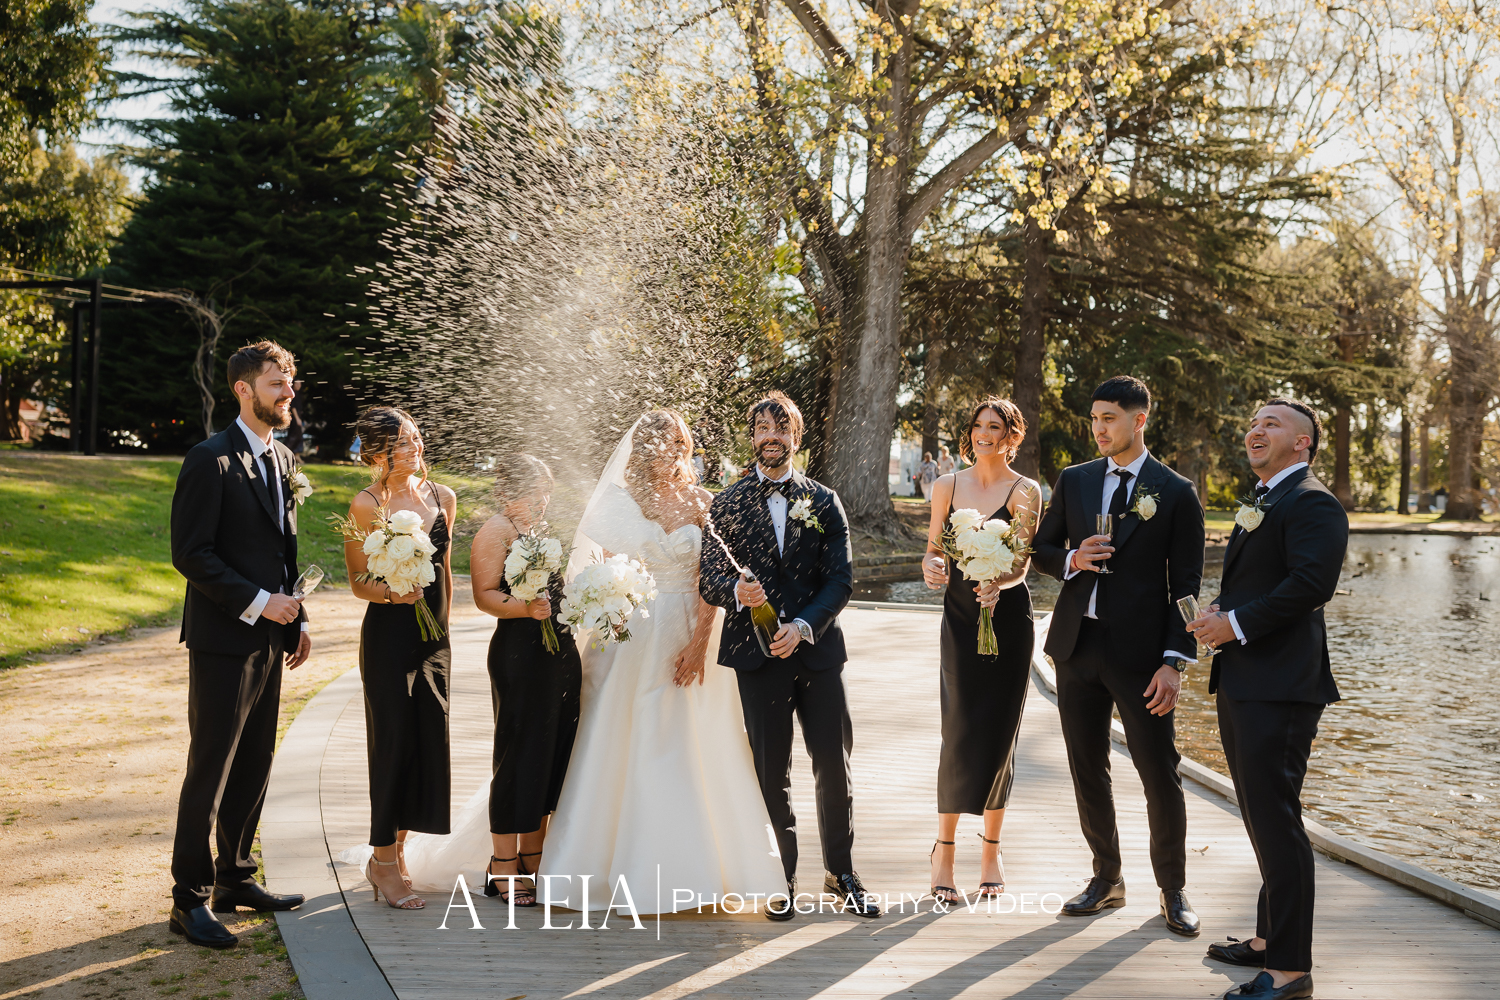 , Lily and Andrew&#8217;s wedding photography at Leonda by the Yarra Hawthorn captured by ATEIA Photography &#038; Video